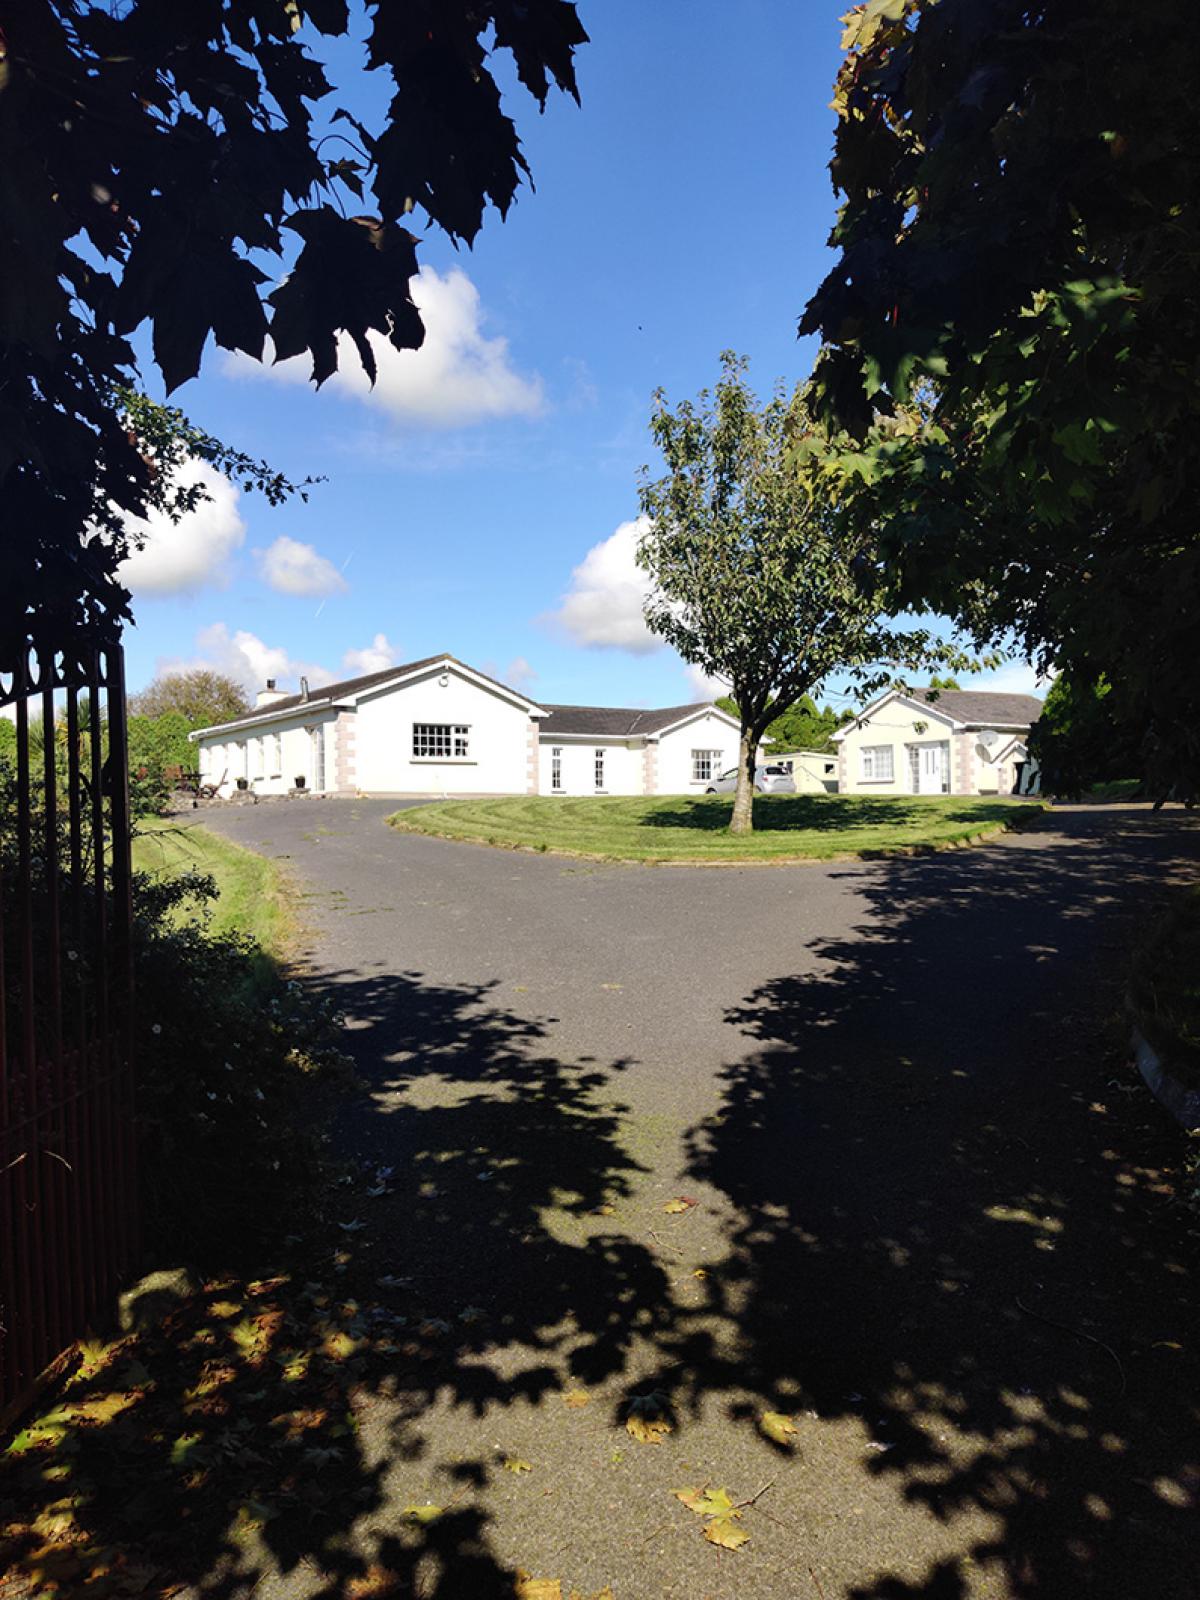 Picture of Bungalow For Sale in Maynooth, Kildare, Ireland